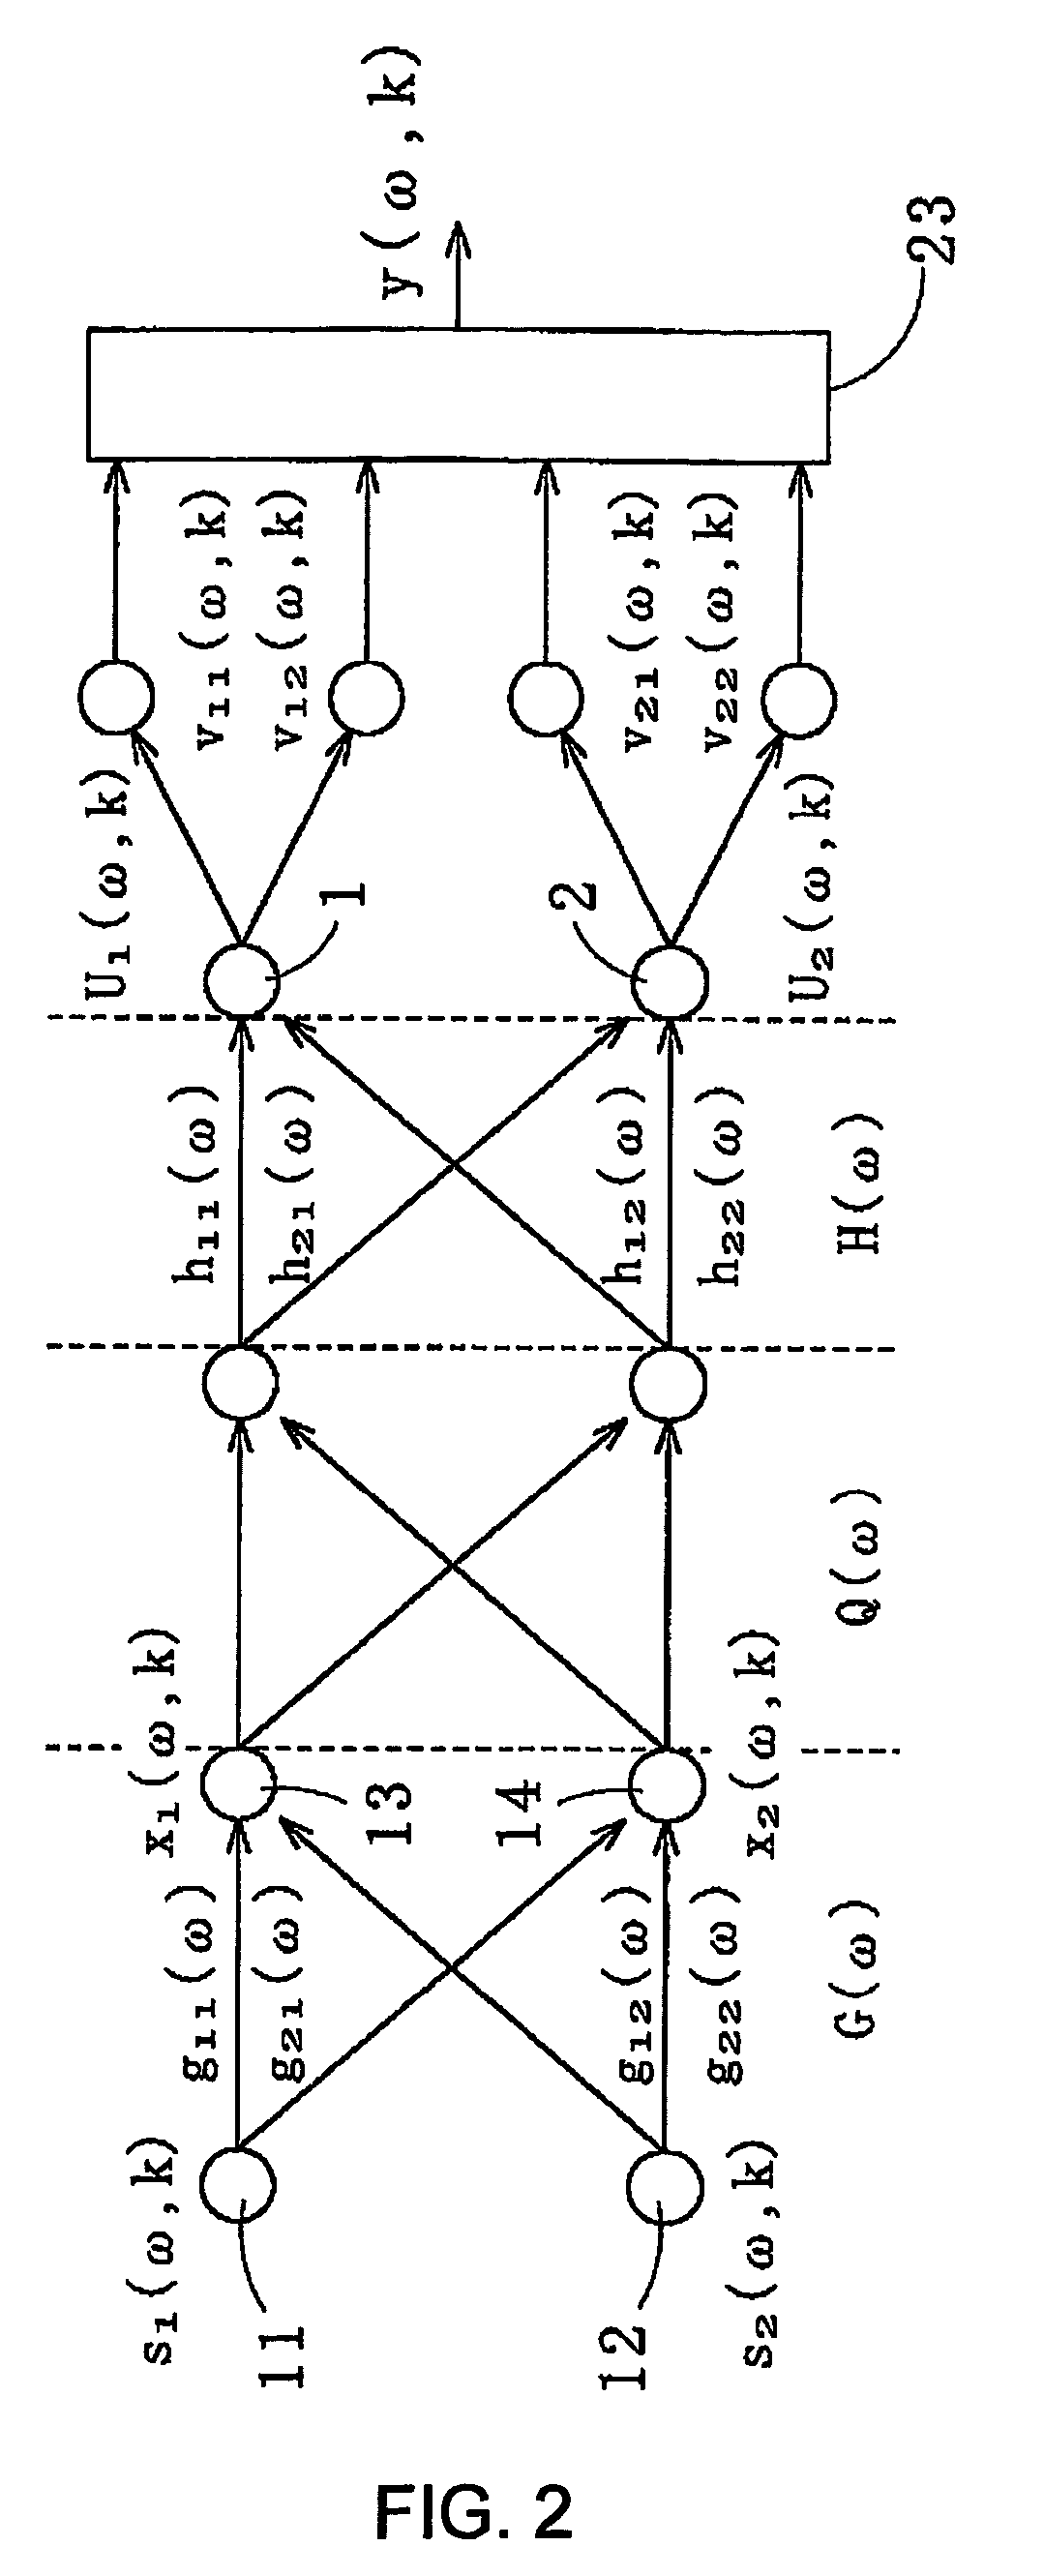 Method for recovering target speech based on amplitude distributions of separated signals